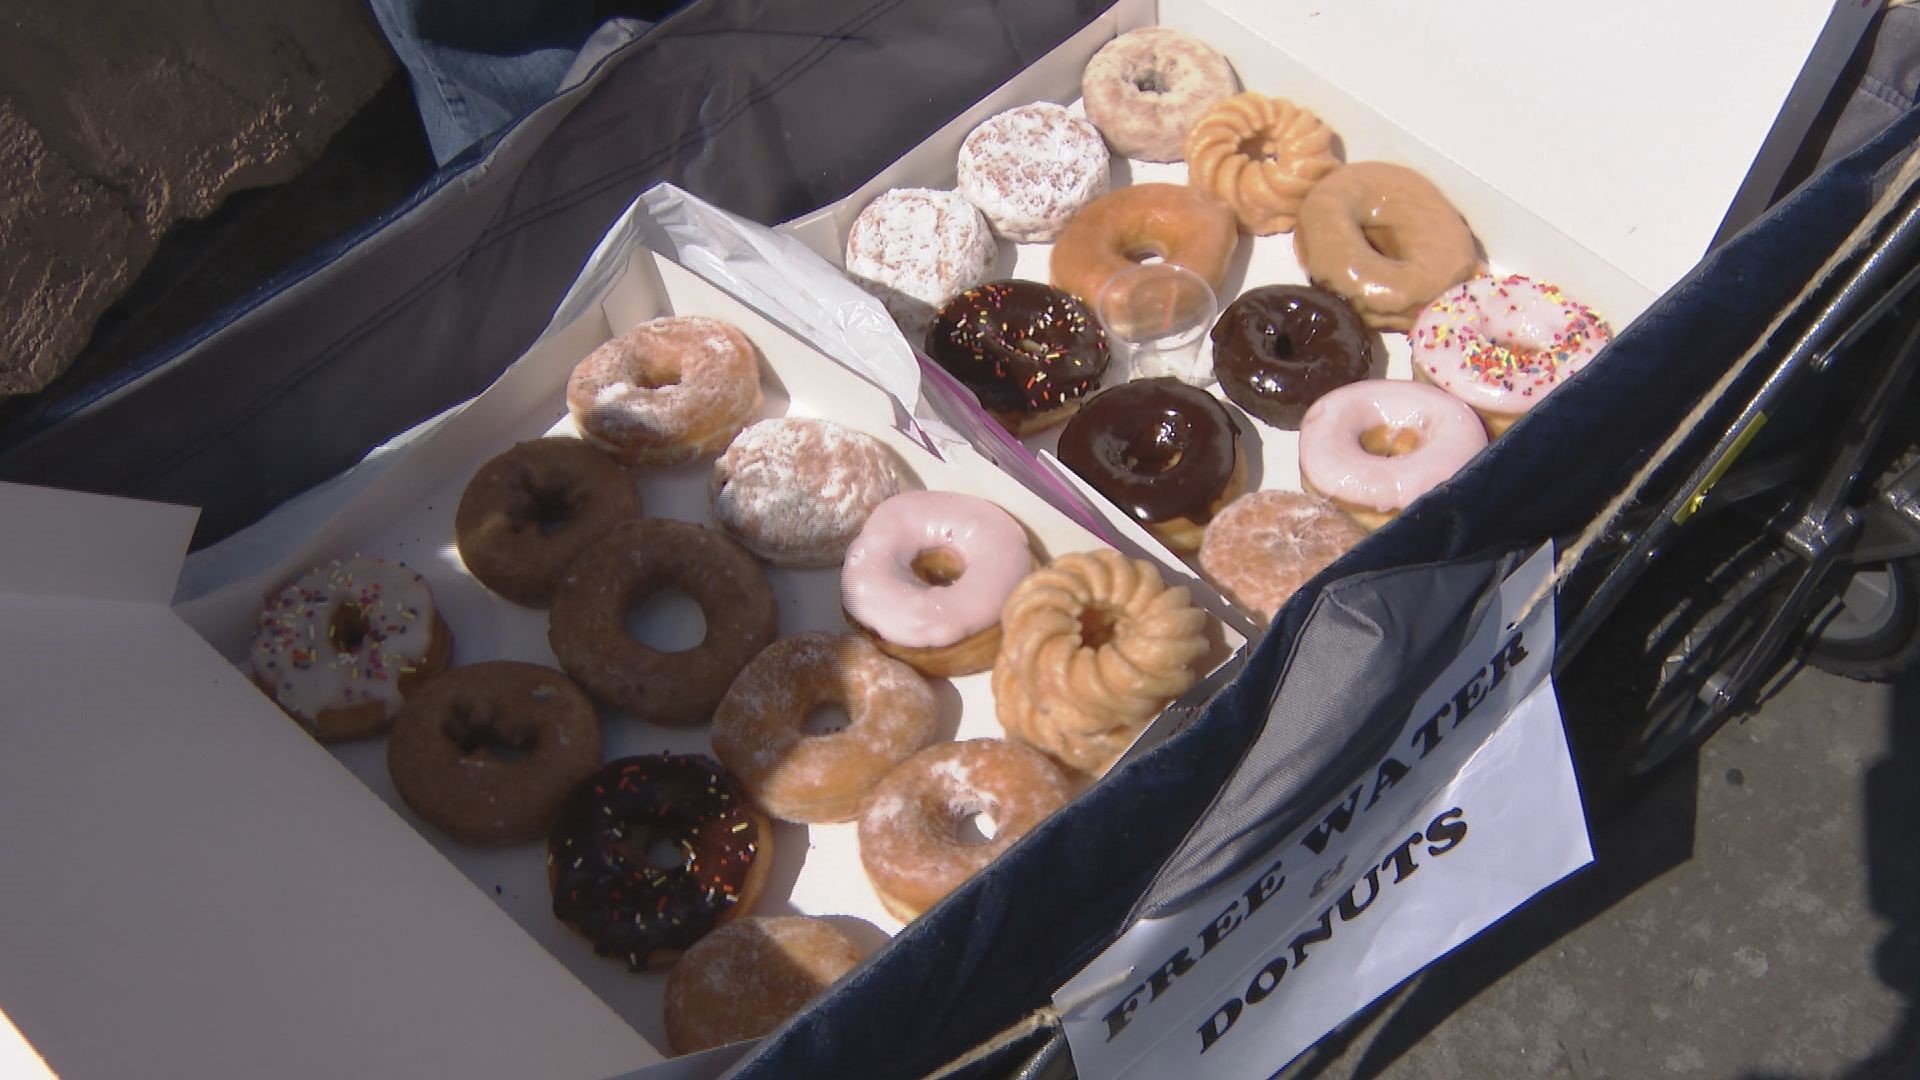 Andrew started by giving out six dozen donuts a week and he is now up to fourteen dozen donuts per week.